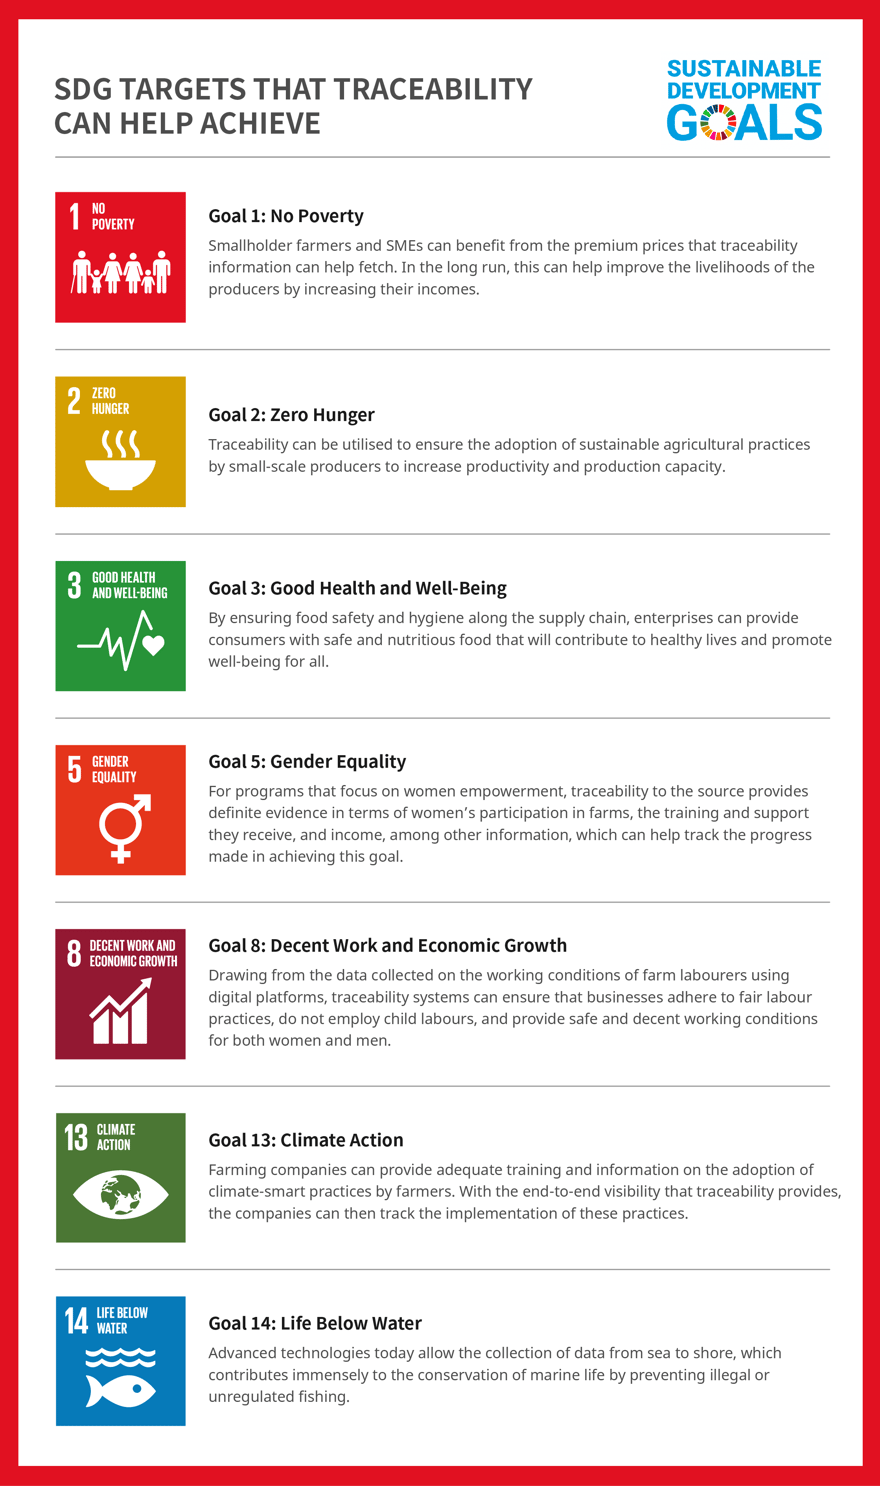 traceability in agriculture to achieve sustainable development goals detailed infographic